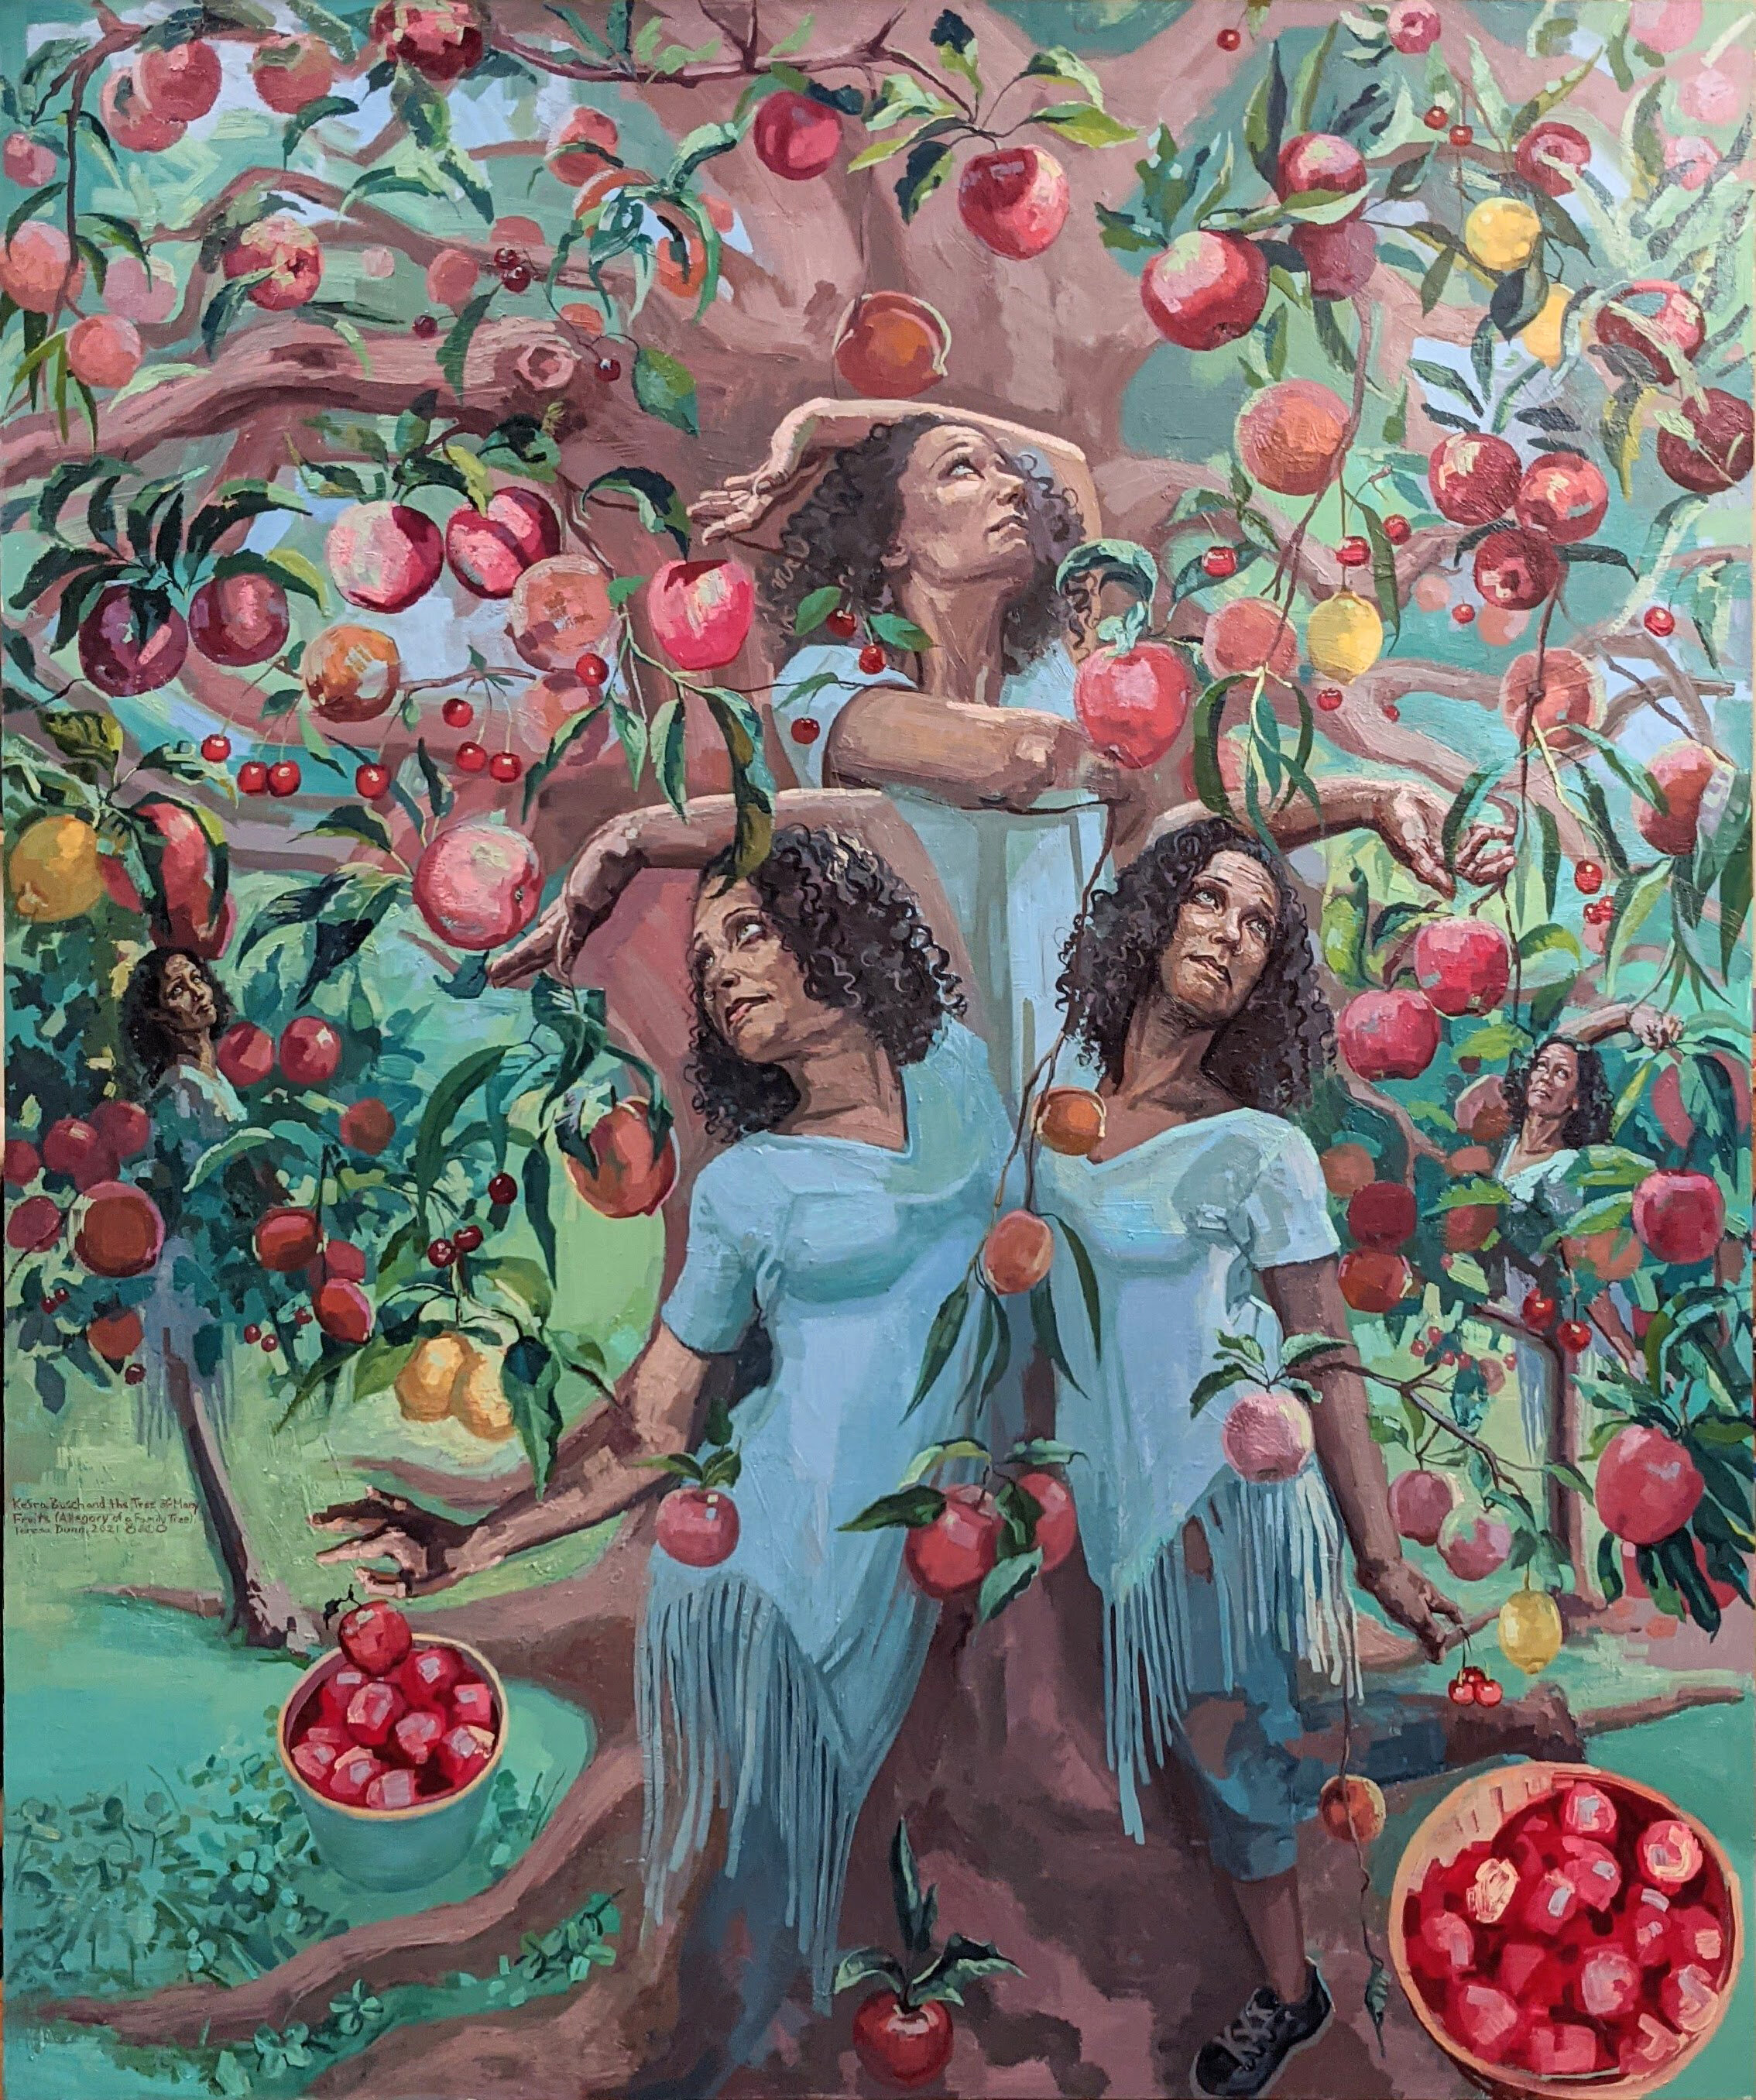 Keira Busch and the Tree of Many Fruits (Allegory of a Family Tree)